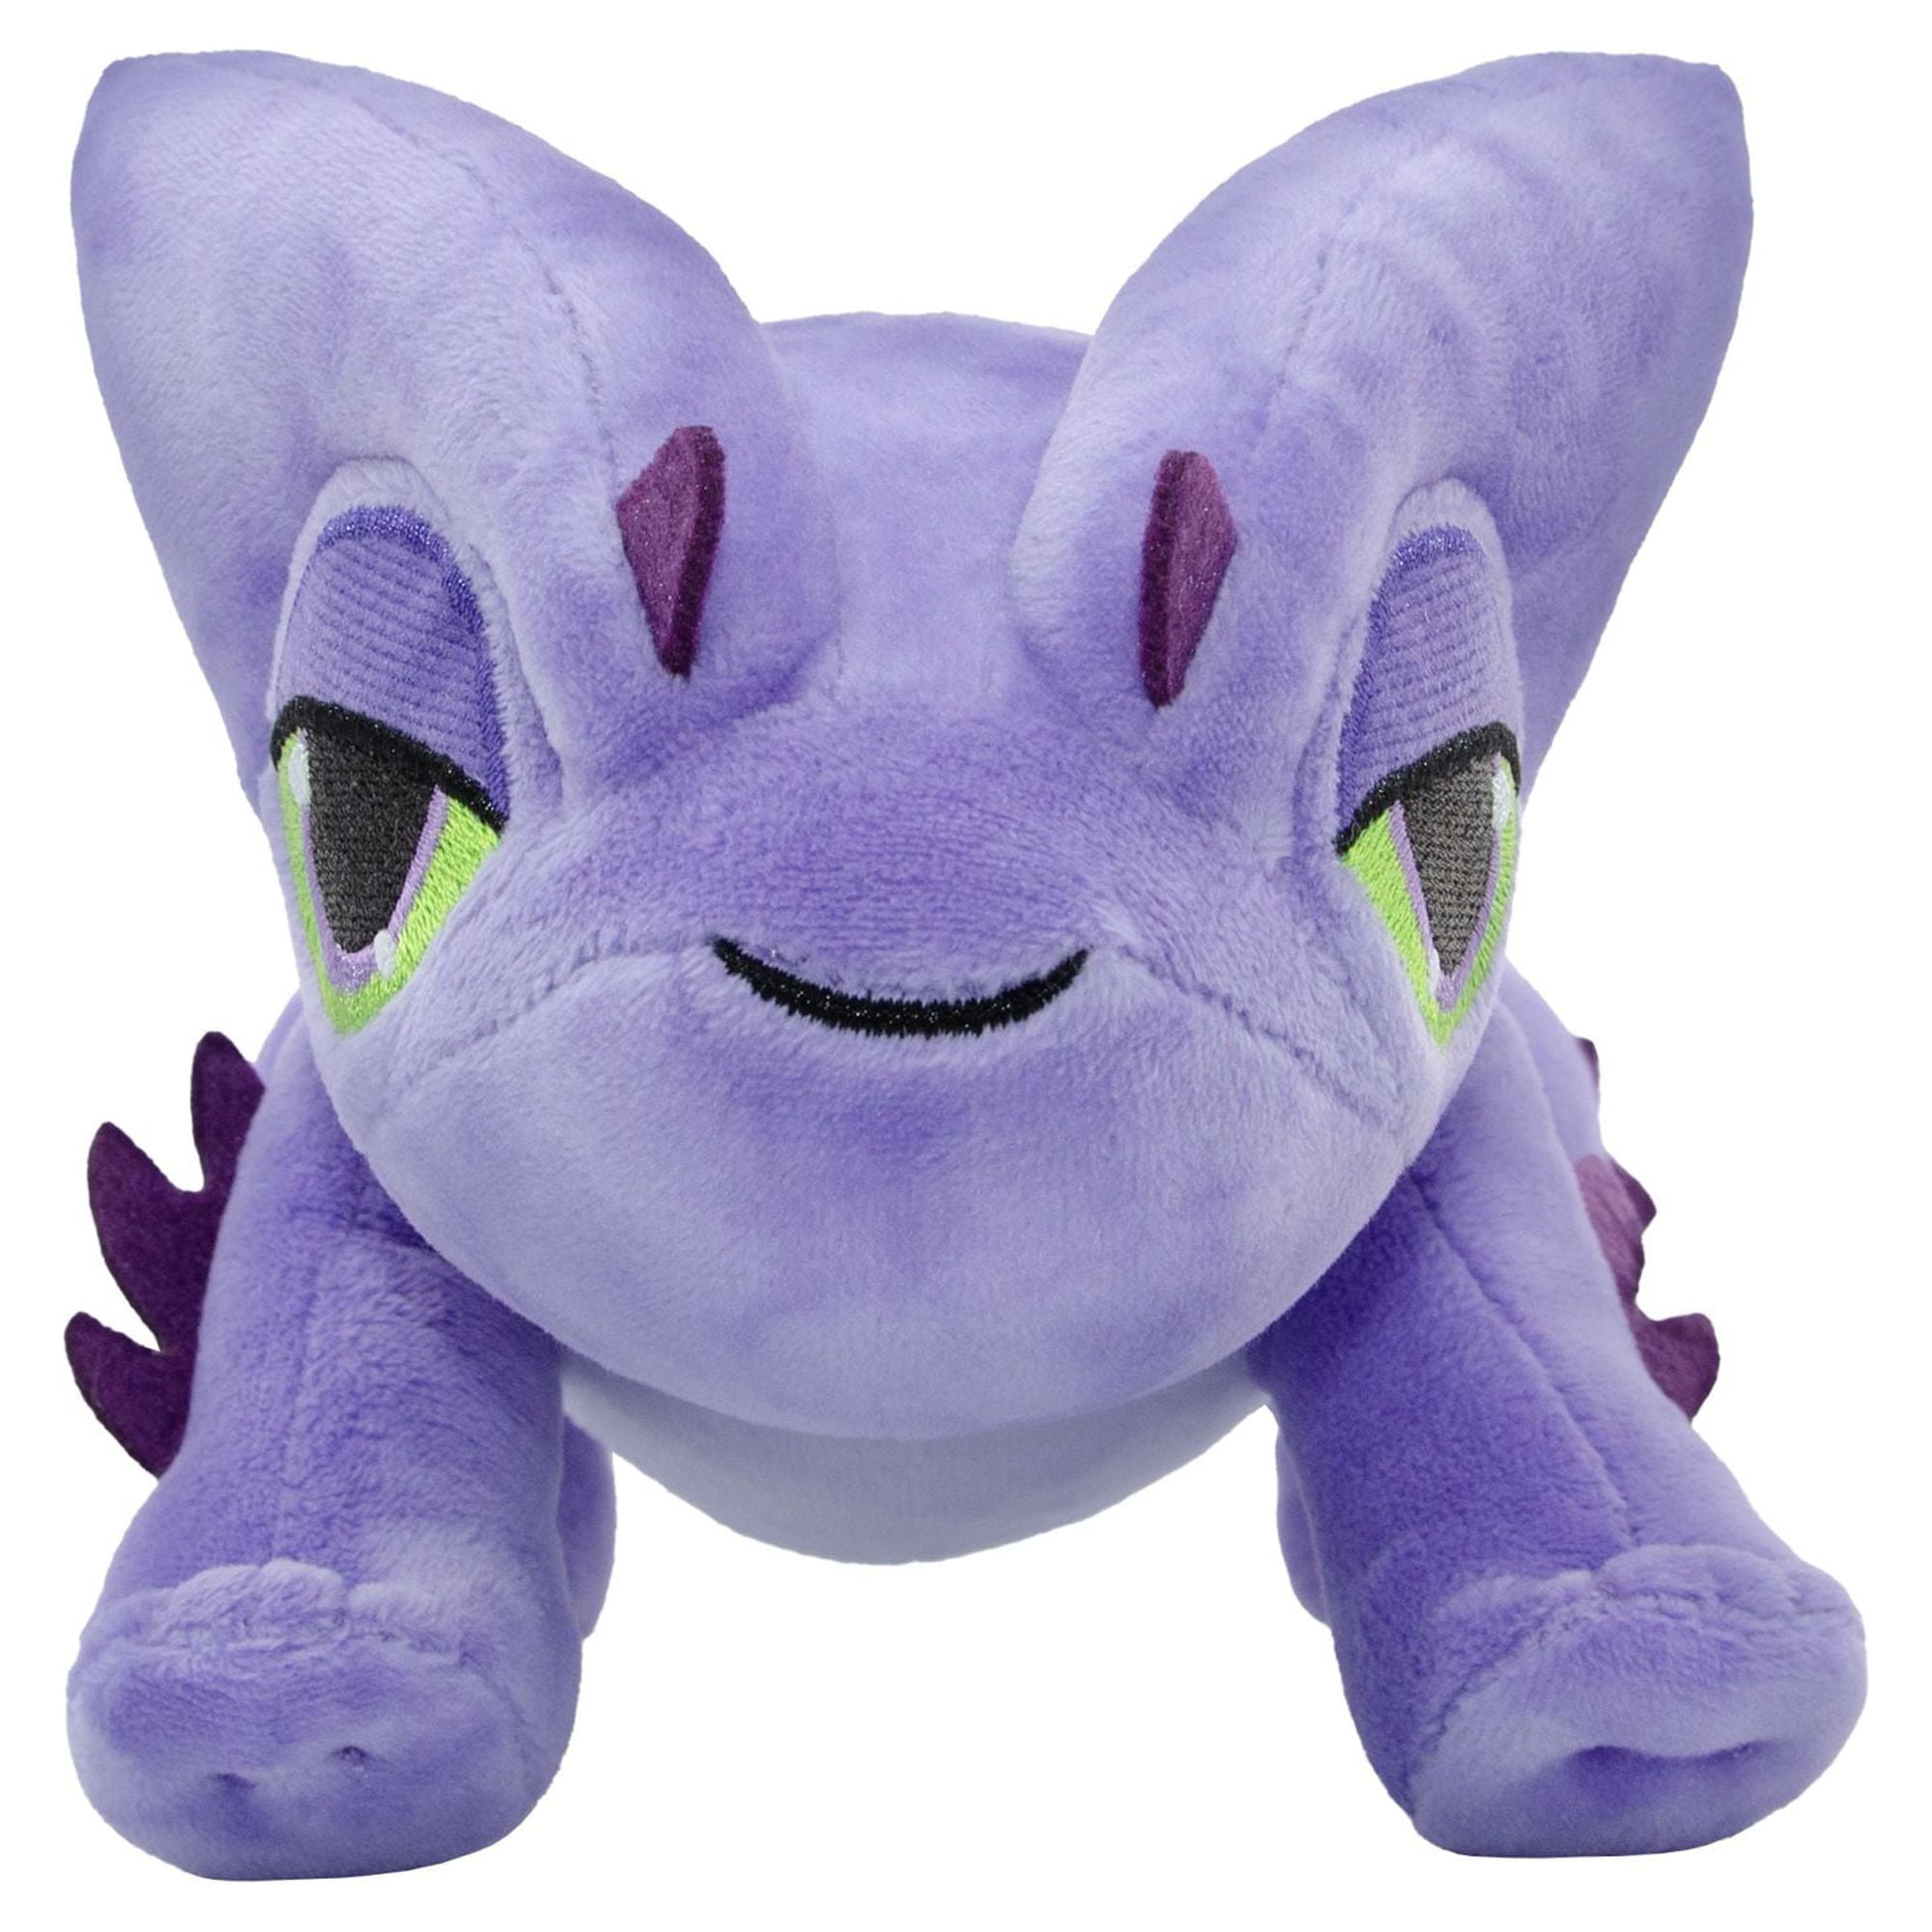 Toikido Yume Brand Zoe Plush Lizard Back To The Outback 8inch Soft Collectible Cuddle Toy Size One